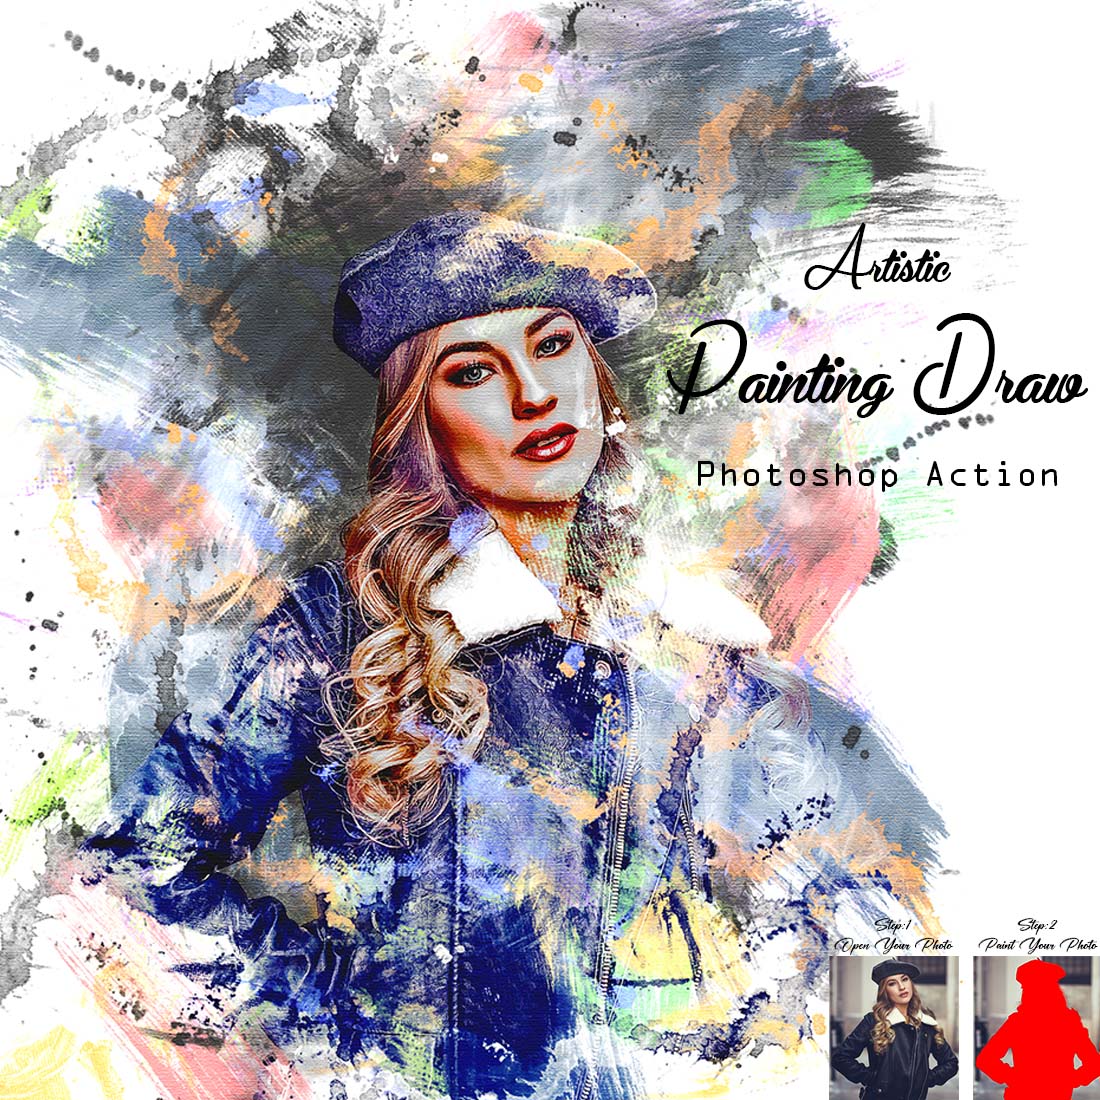 Artistic Painting Draw Photoshop Action cover image.